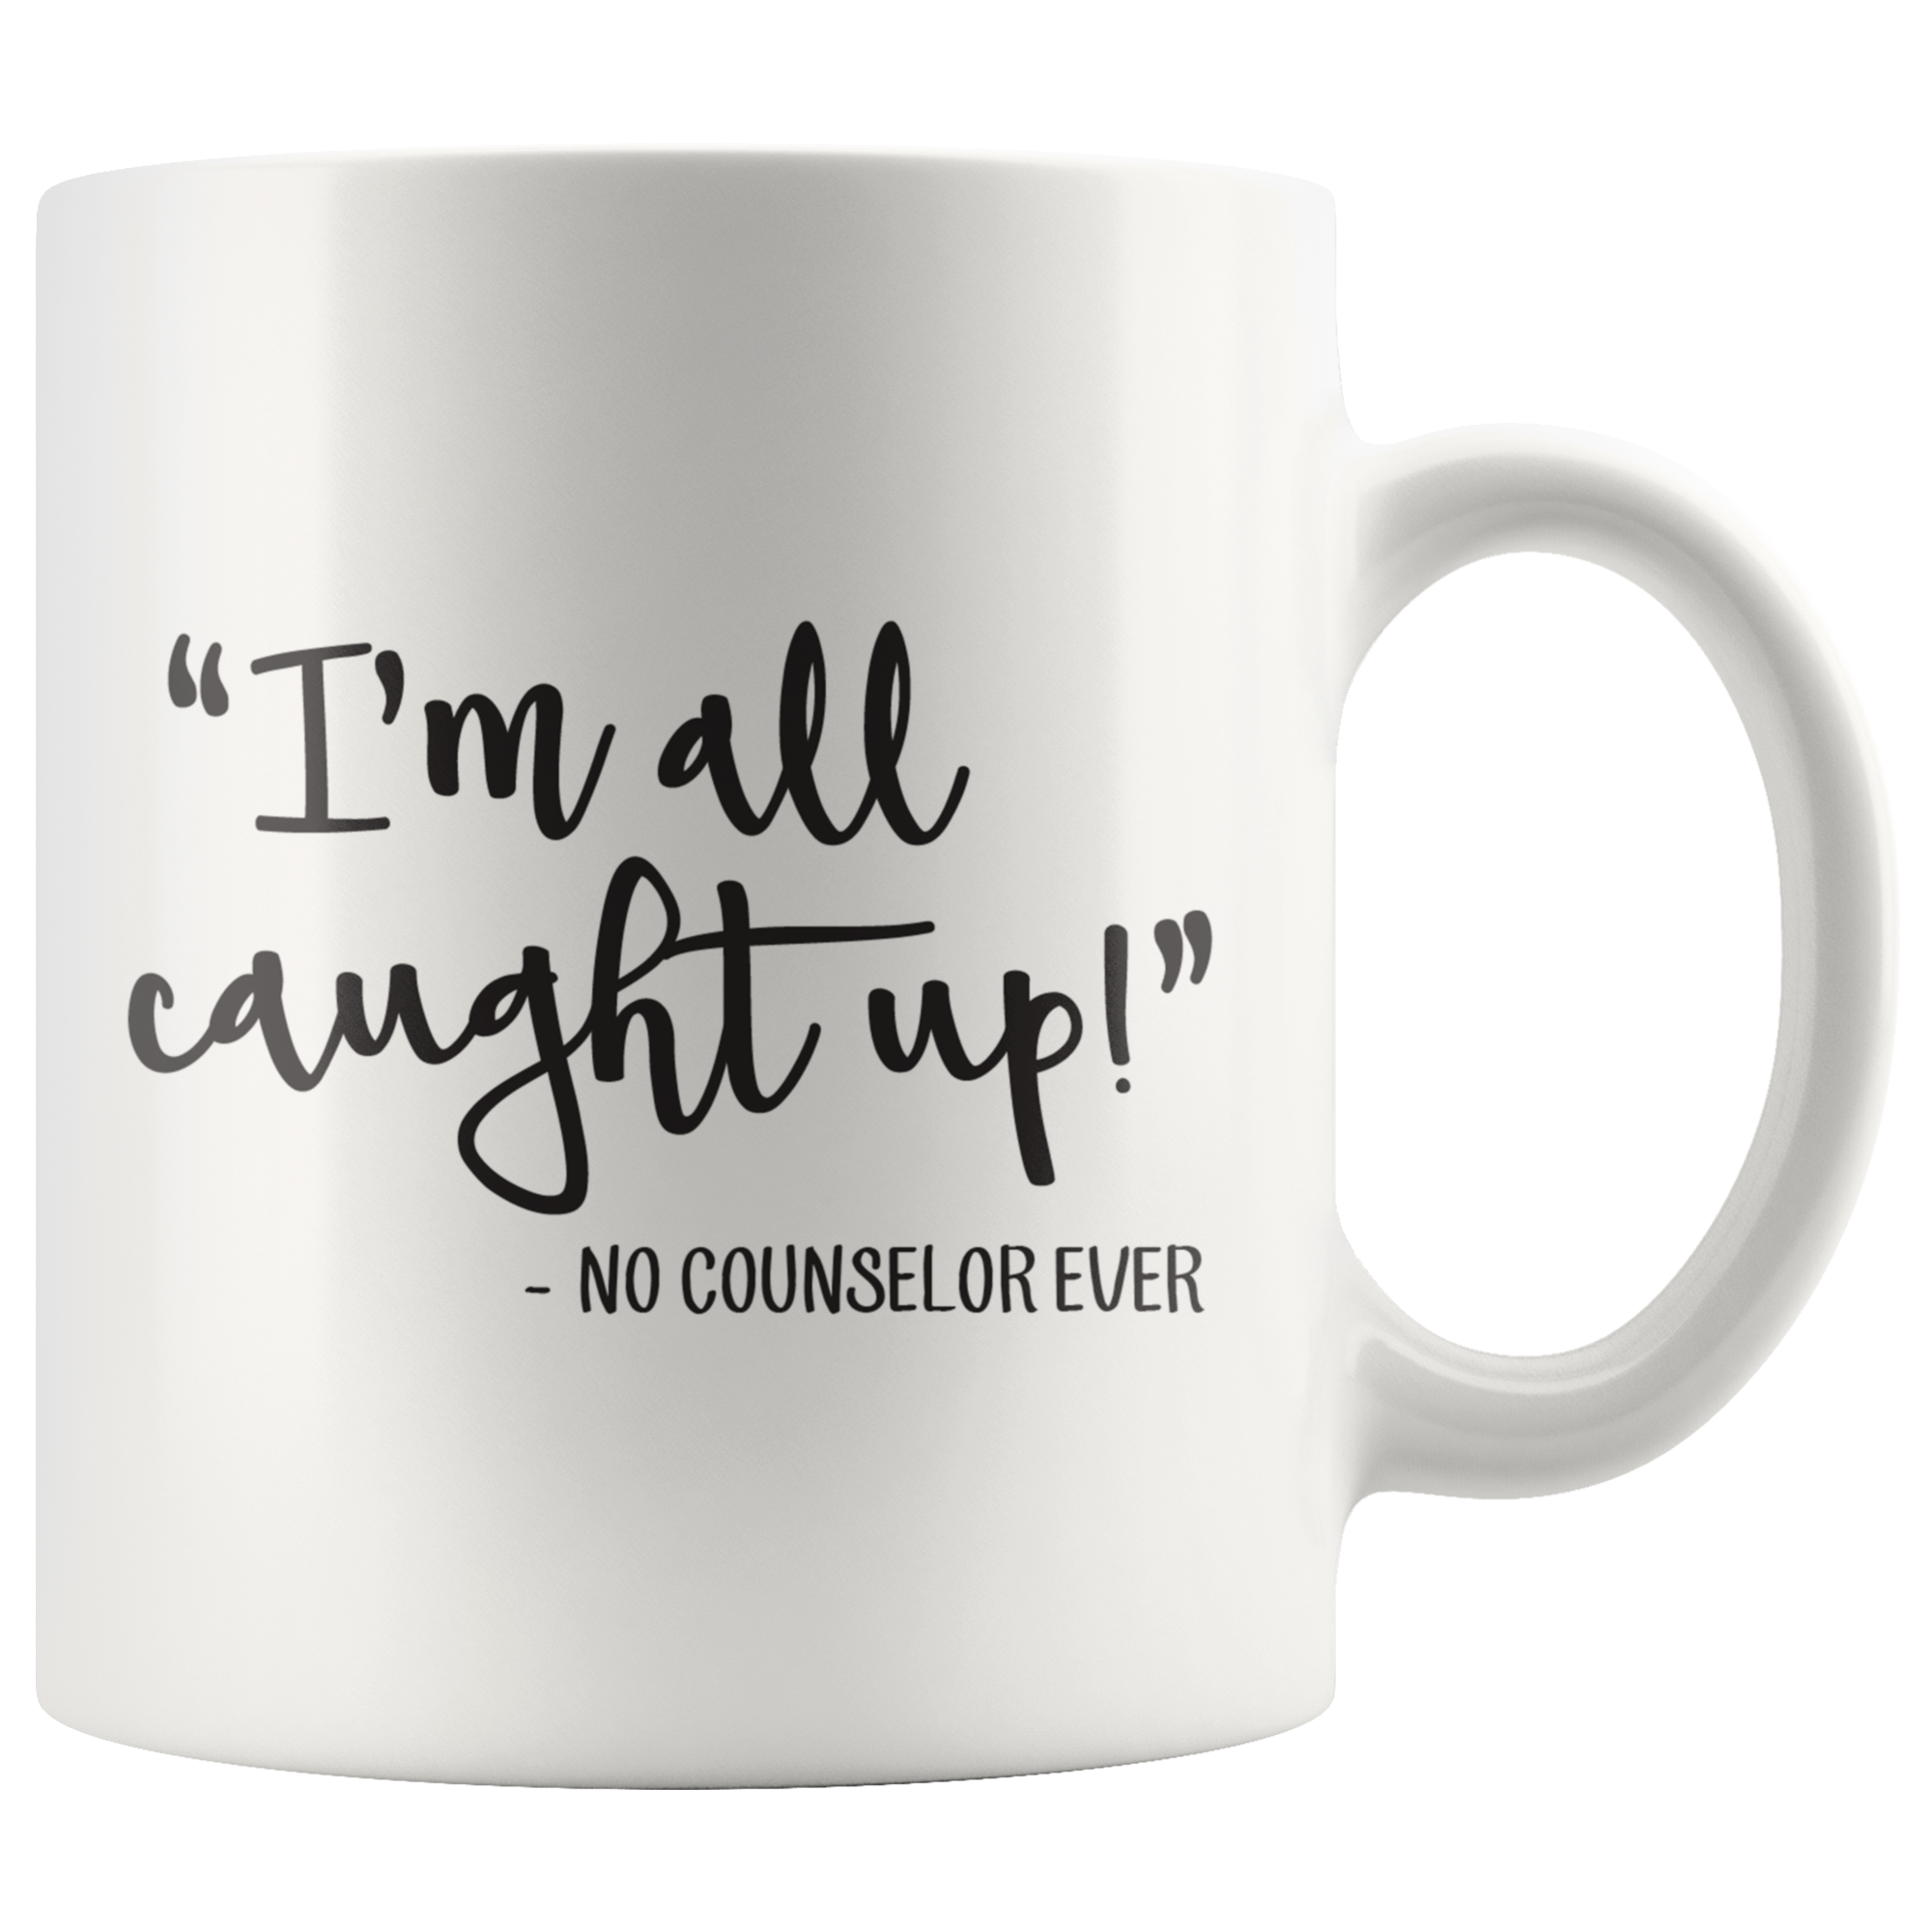 I'm All Caught Up! Funny School Counselor Mug - TL